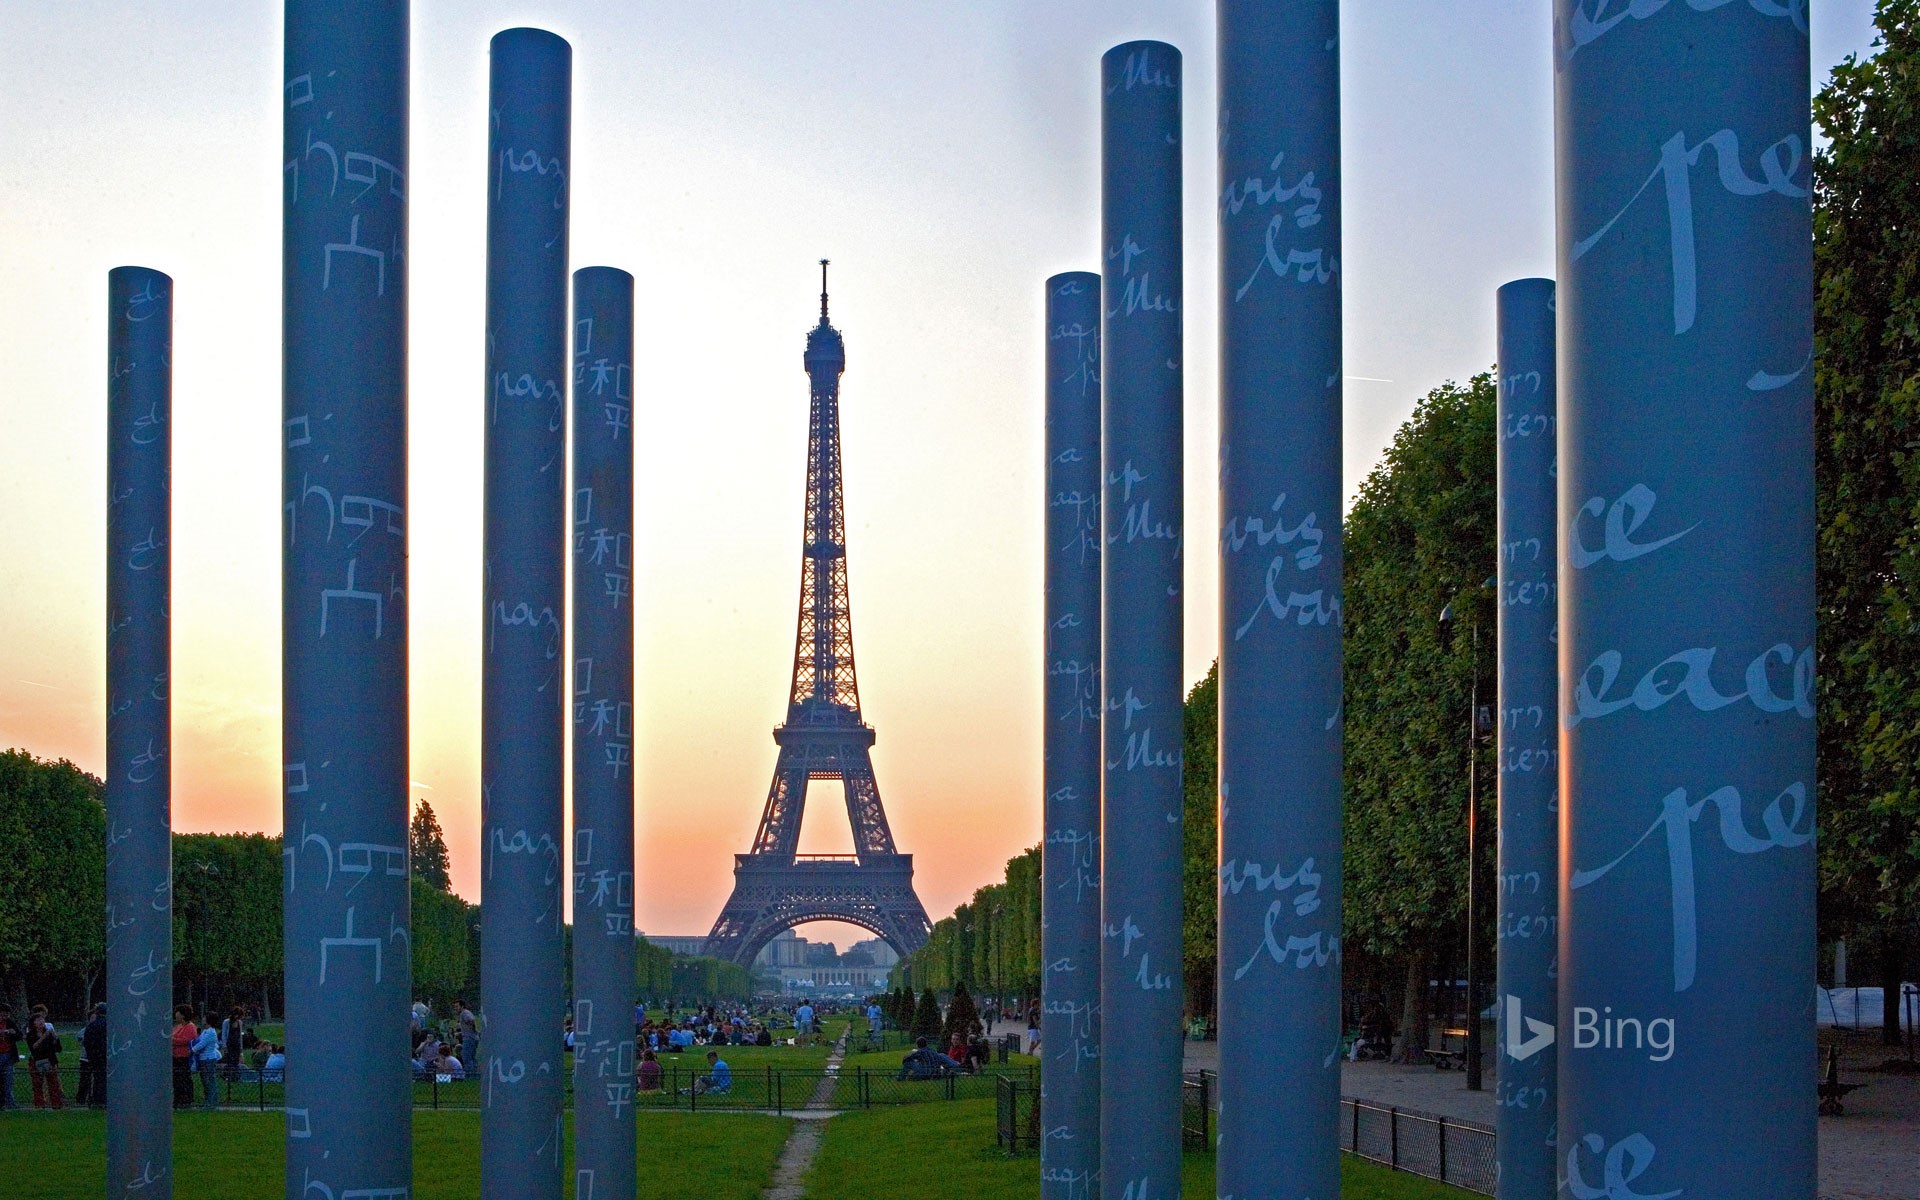 'The Wall for Peace' and the Eiffel Tower in Paris for the International Day of Peace